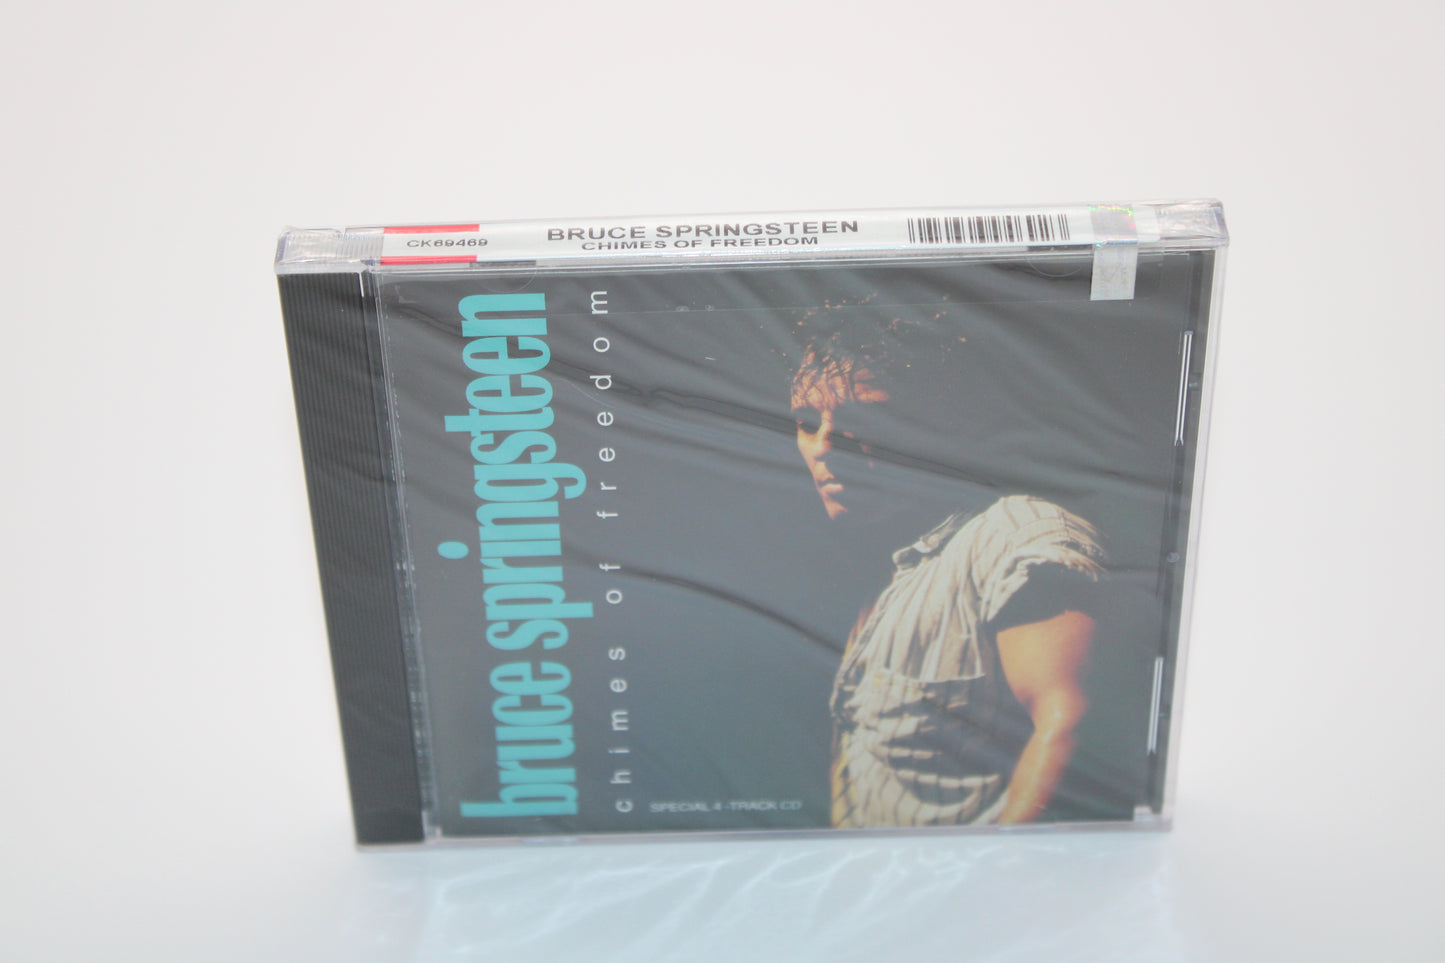 Bruce Springsteen CD/EP Sealed Chimes of Freedom 4 track "live" Collectible